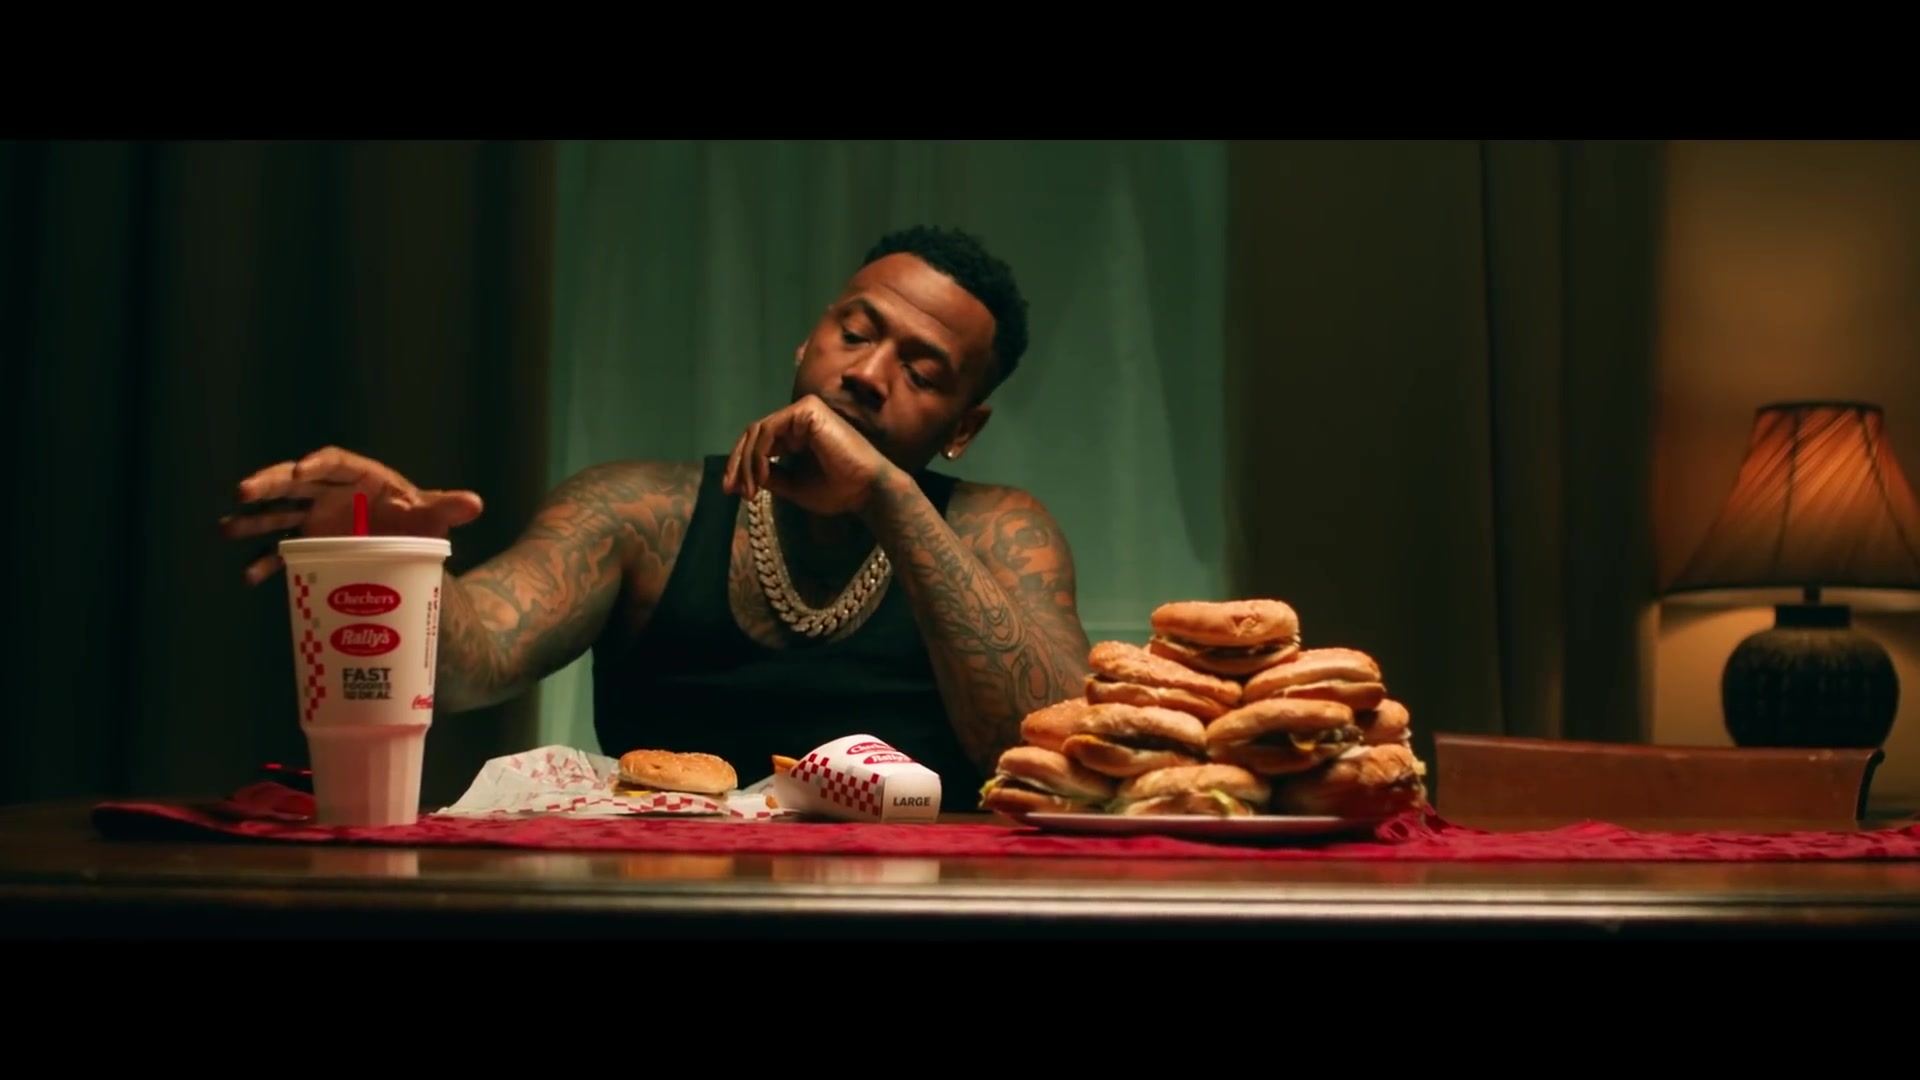 Moneybagg Yo Product Placement Seen On Screen